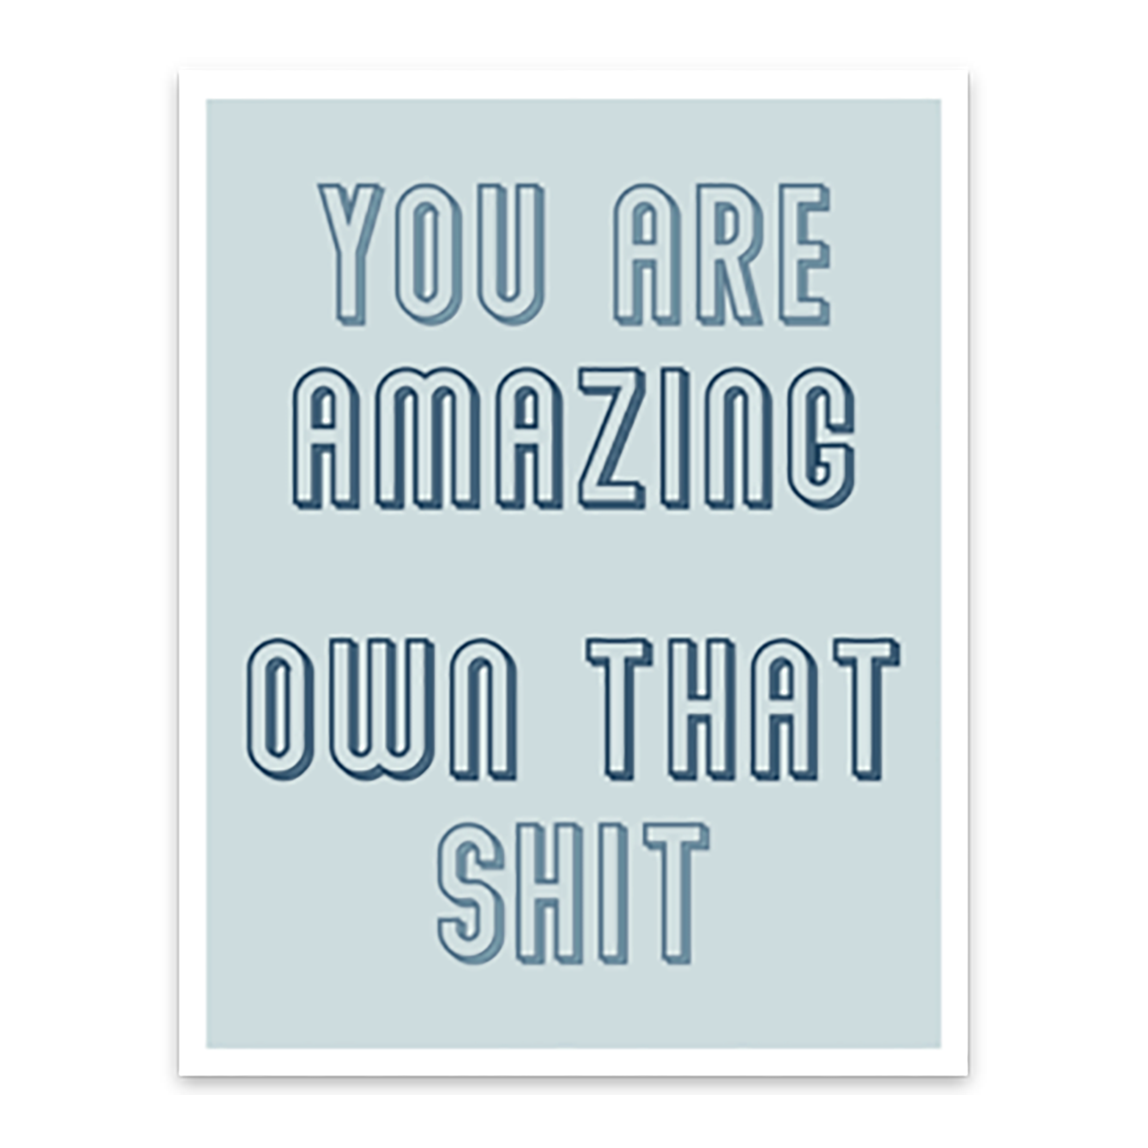 Waterproof vinyl magnet; blue block font "you are amazing own that shit" on light blue background with white border; 3-1/2" L x 2-3/4" W